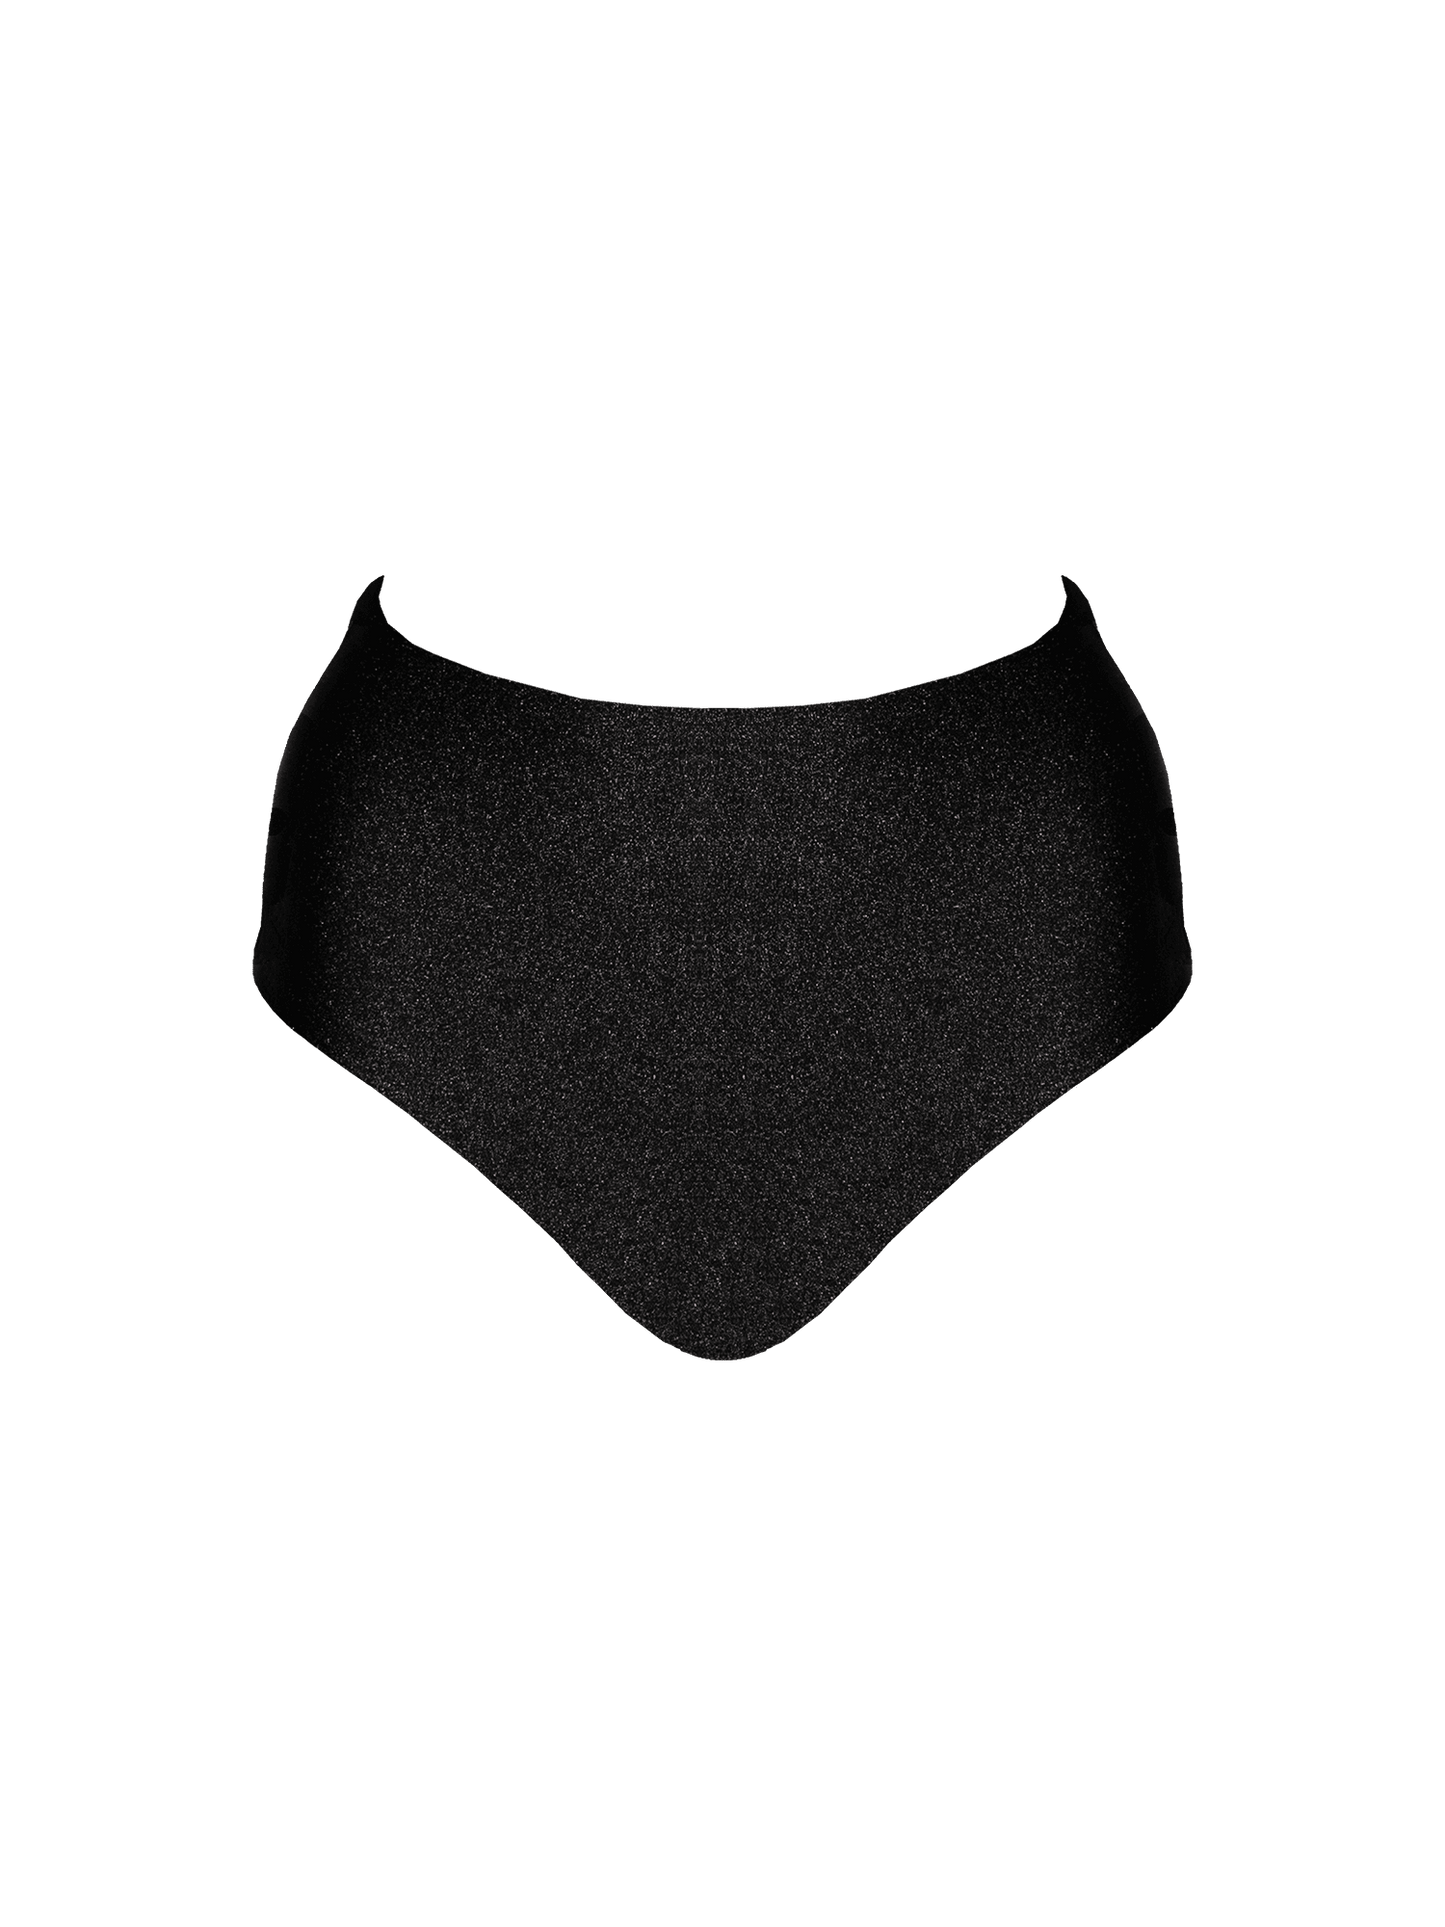 Second Skin|Shimmer ~ Classic High Waisted Pantie - Onyx Black